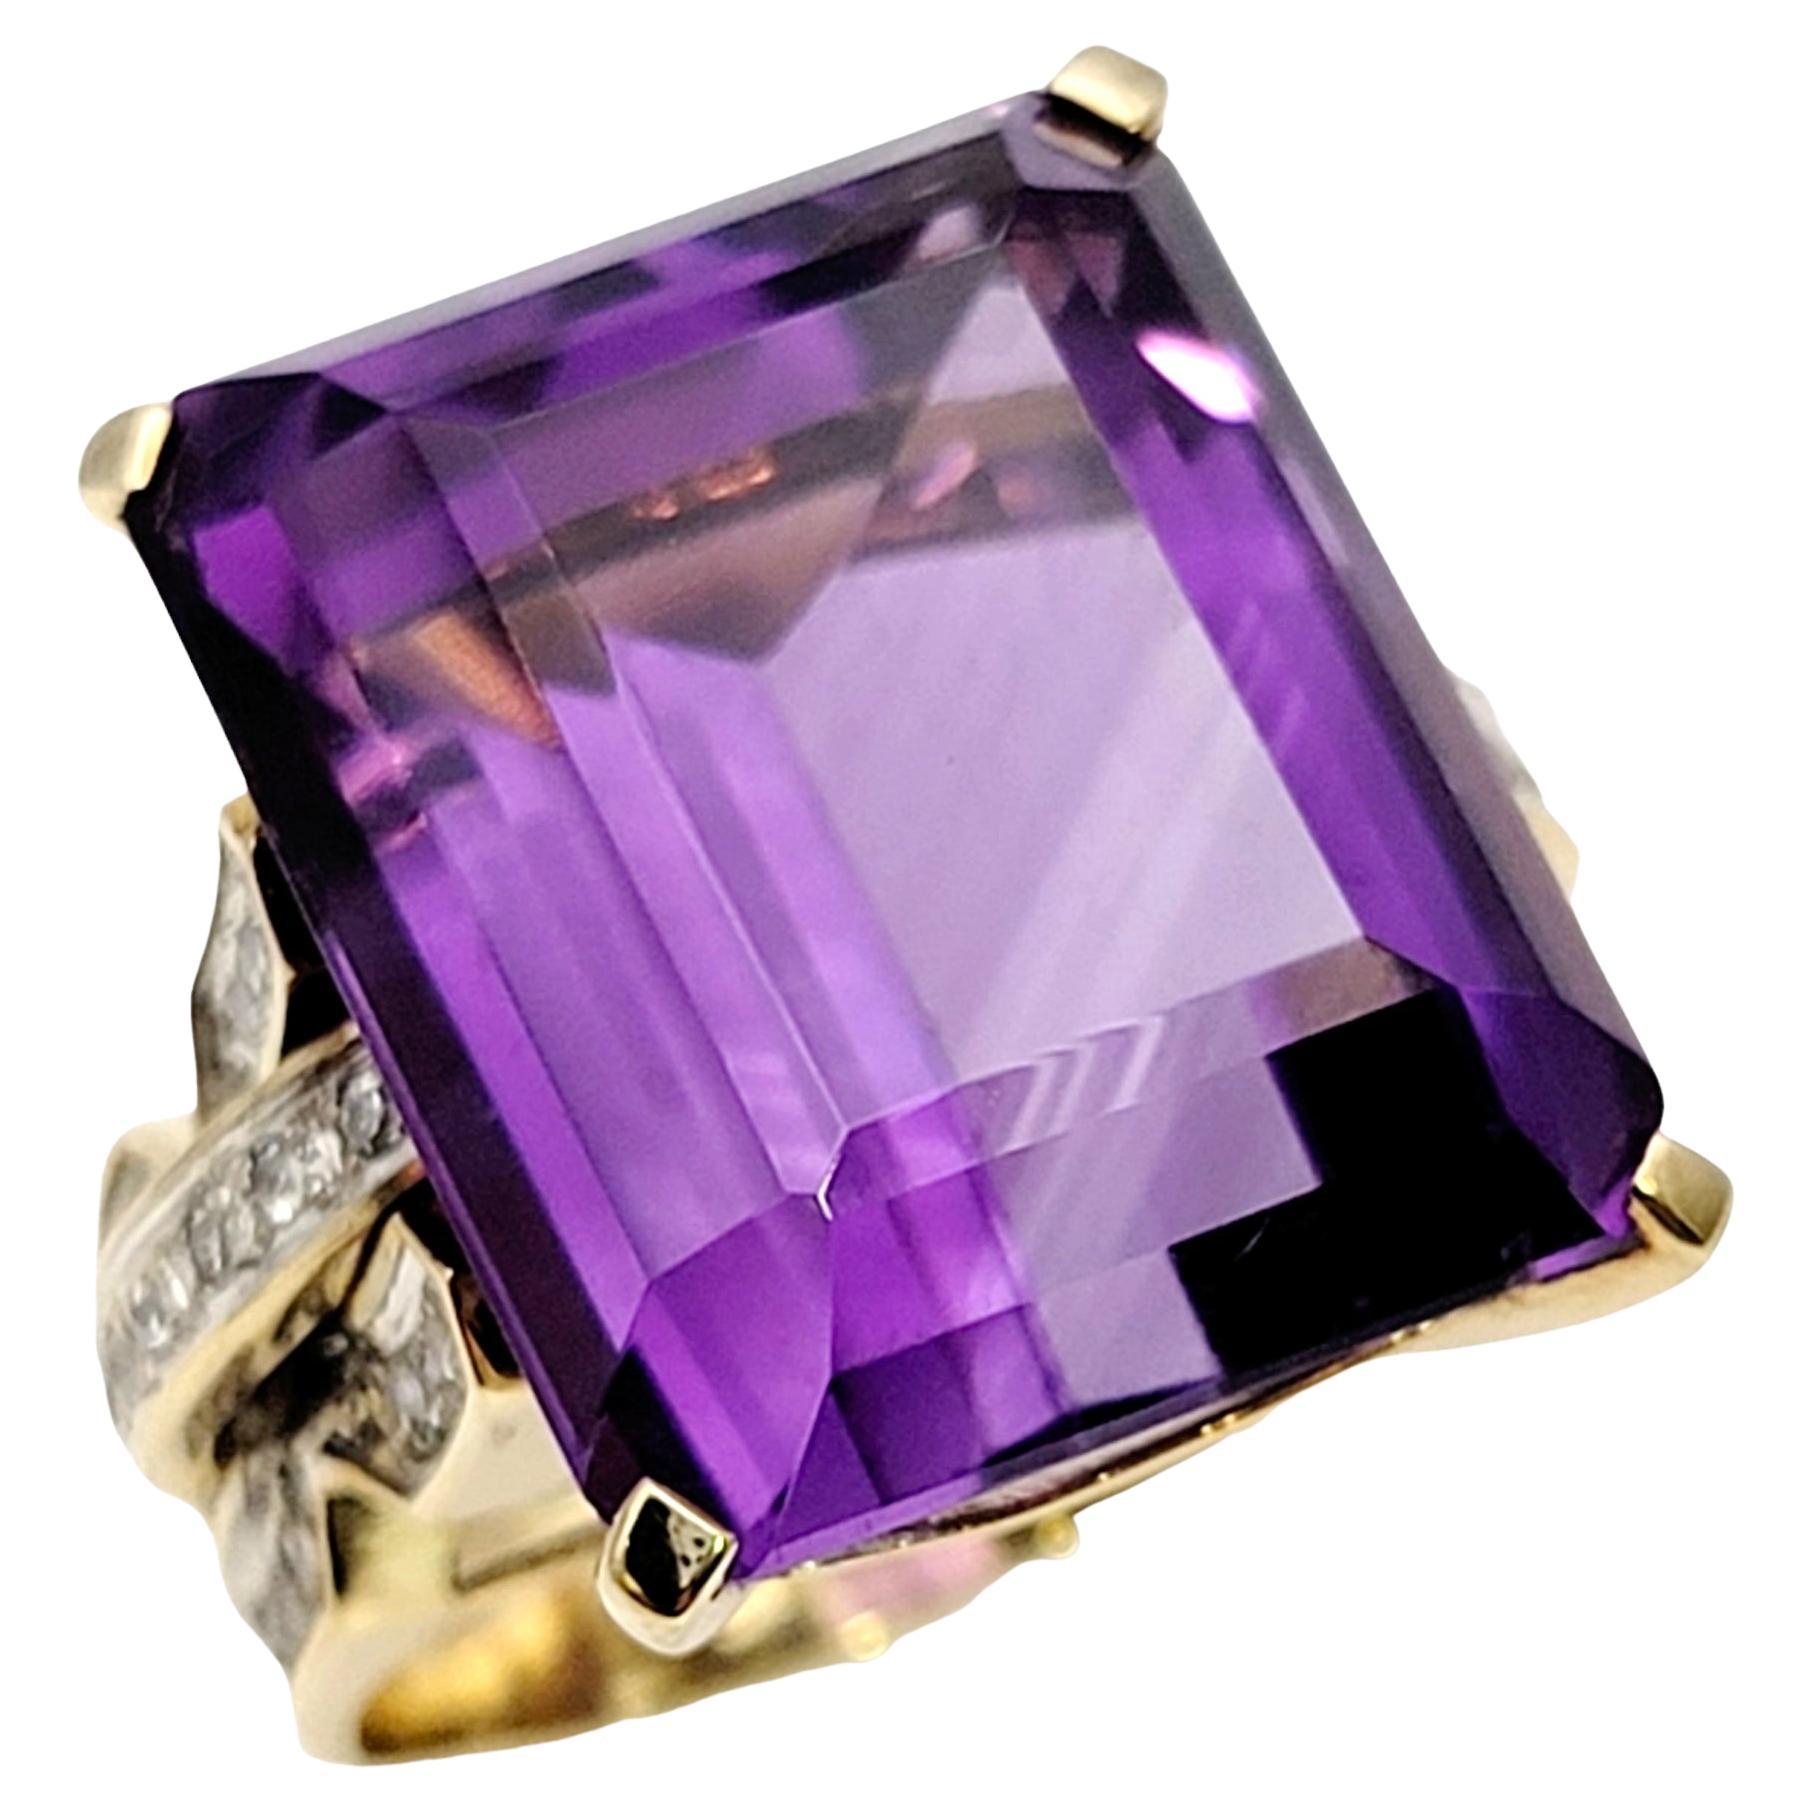 Huge 34.85 Carat Emerald Cut Amethyst Cocktail Ring with Side Diamond Detailing